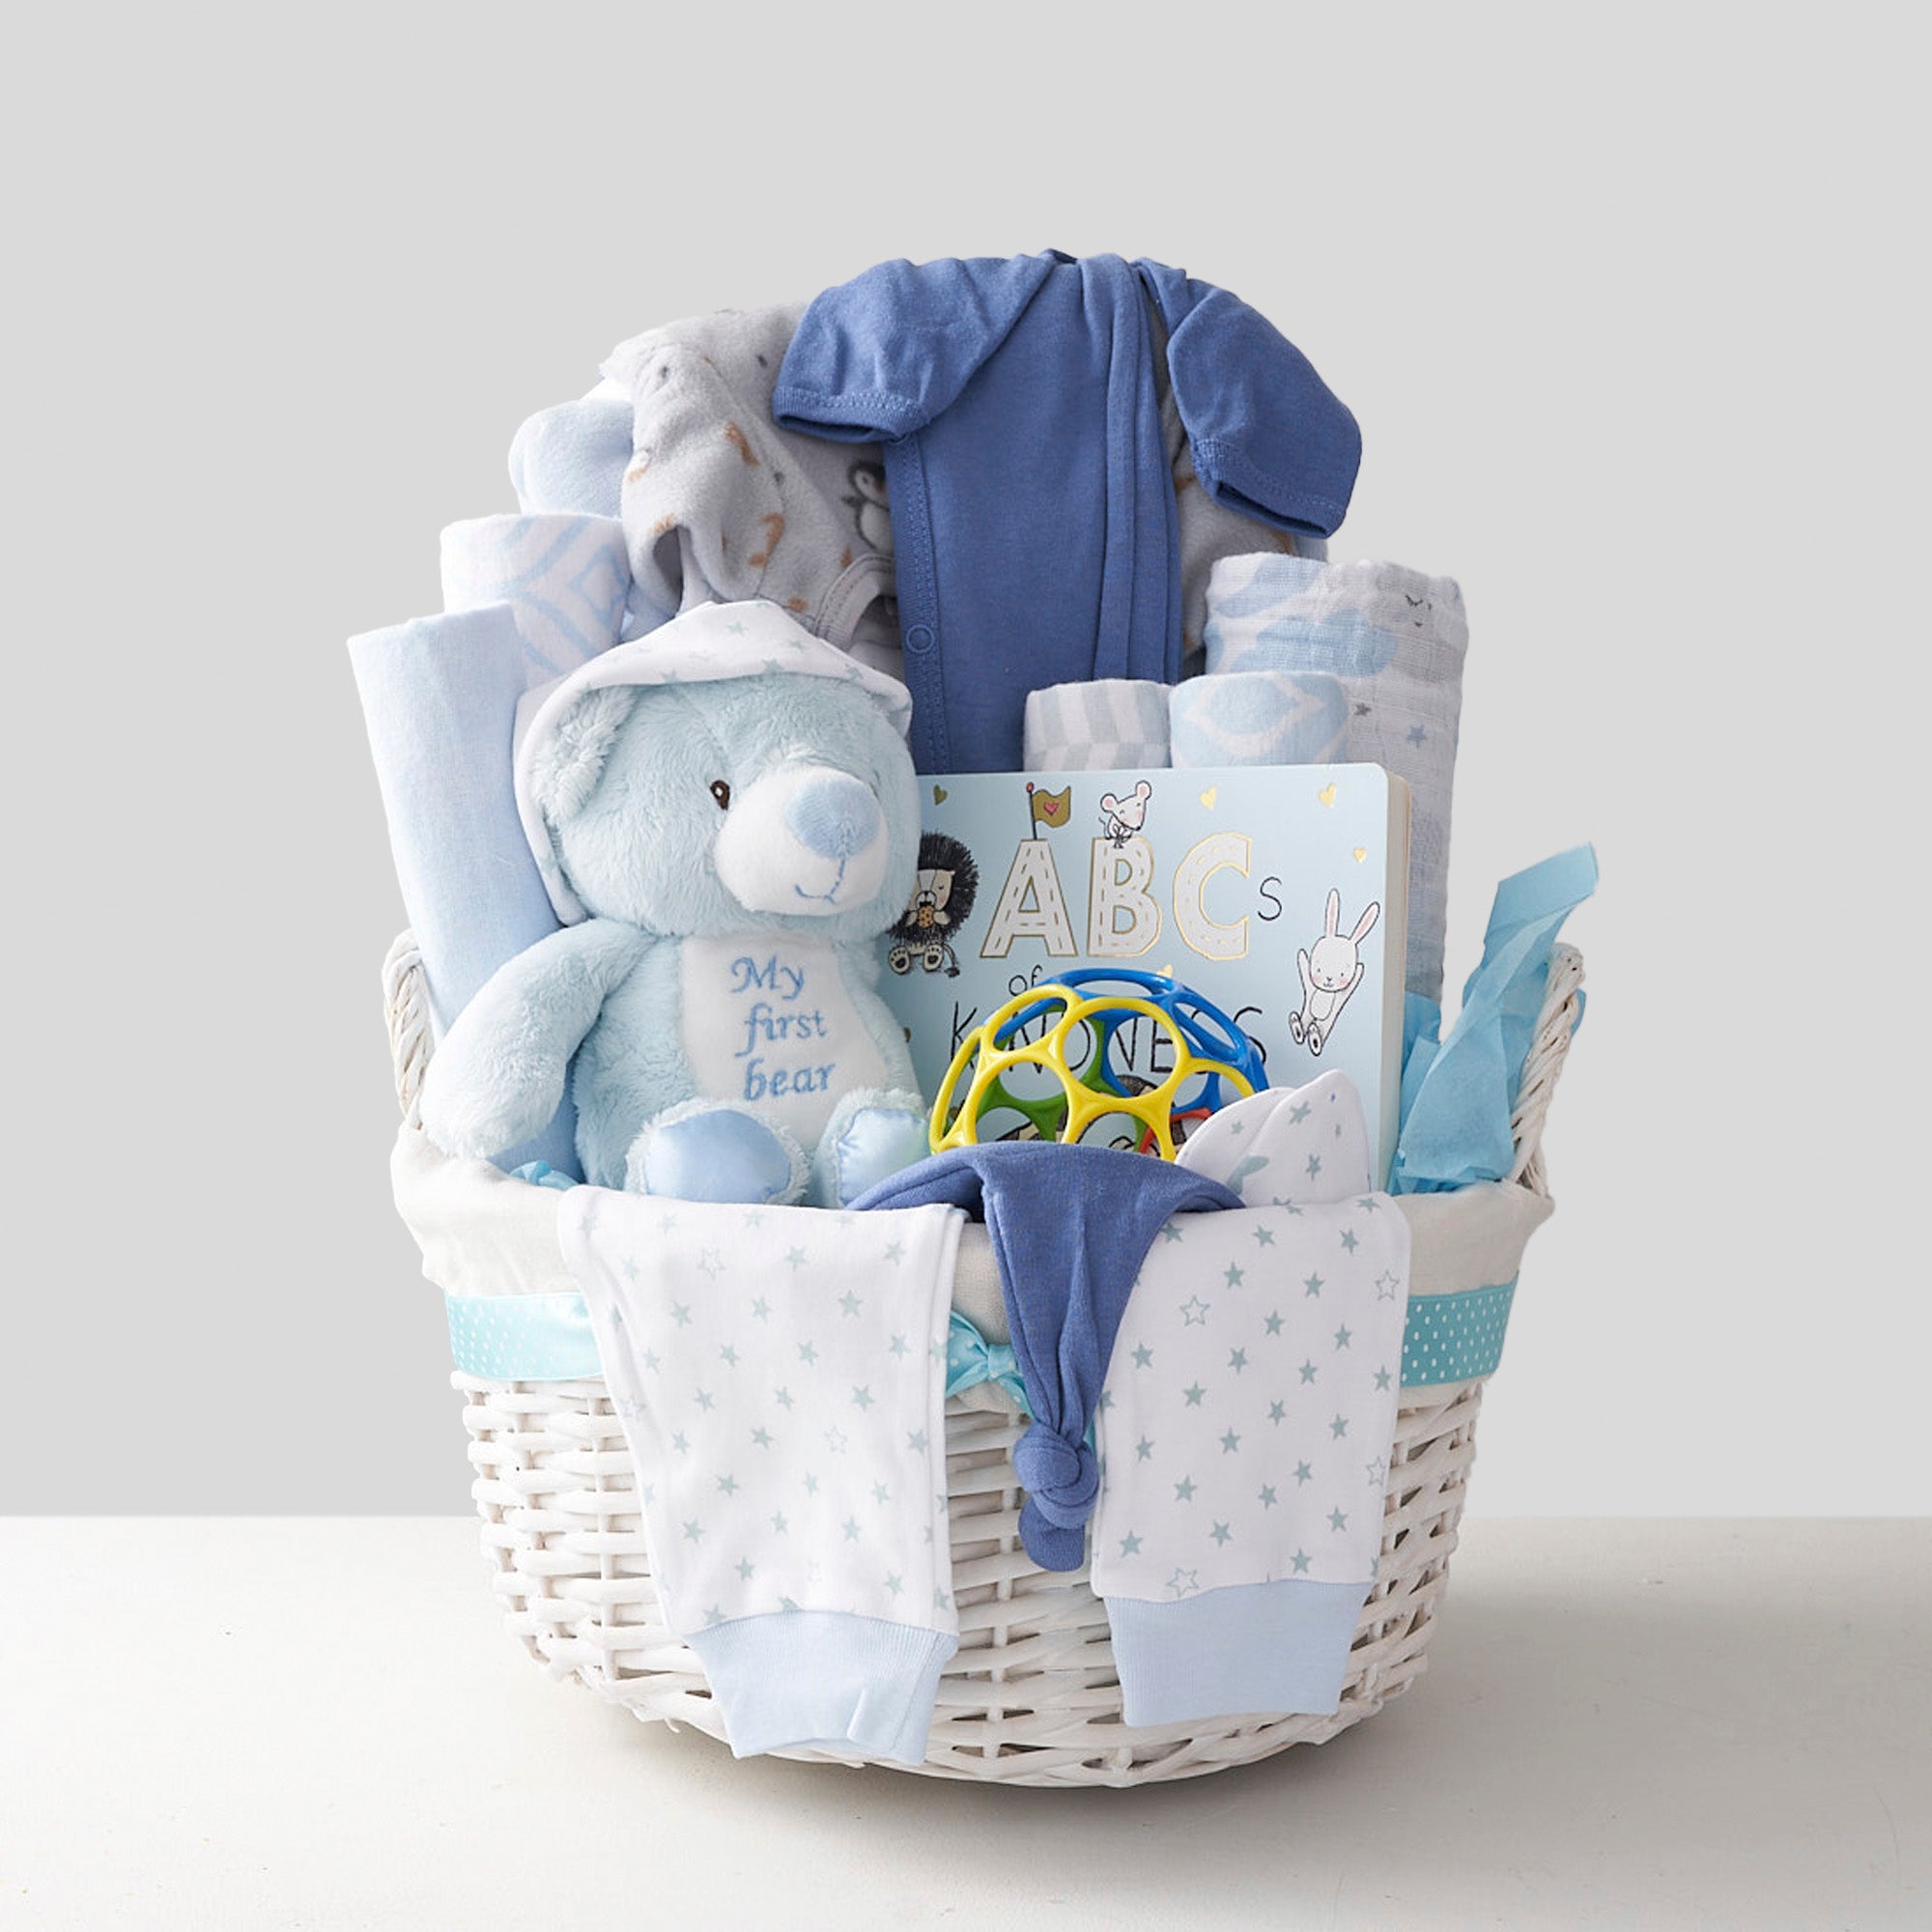 Blue baby basket for newborn with teddy bear, toys, books, clothes, shoes and pajamas.